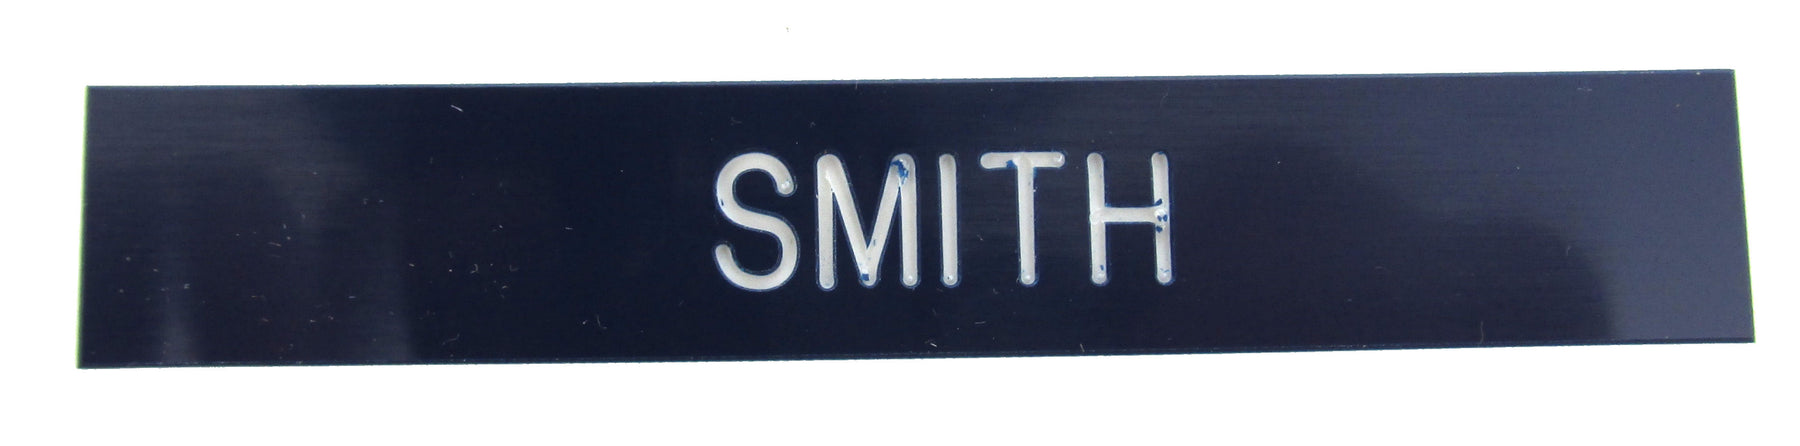 Old Style Engraved U.S. Air Force Name Plate